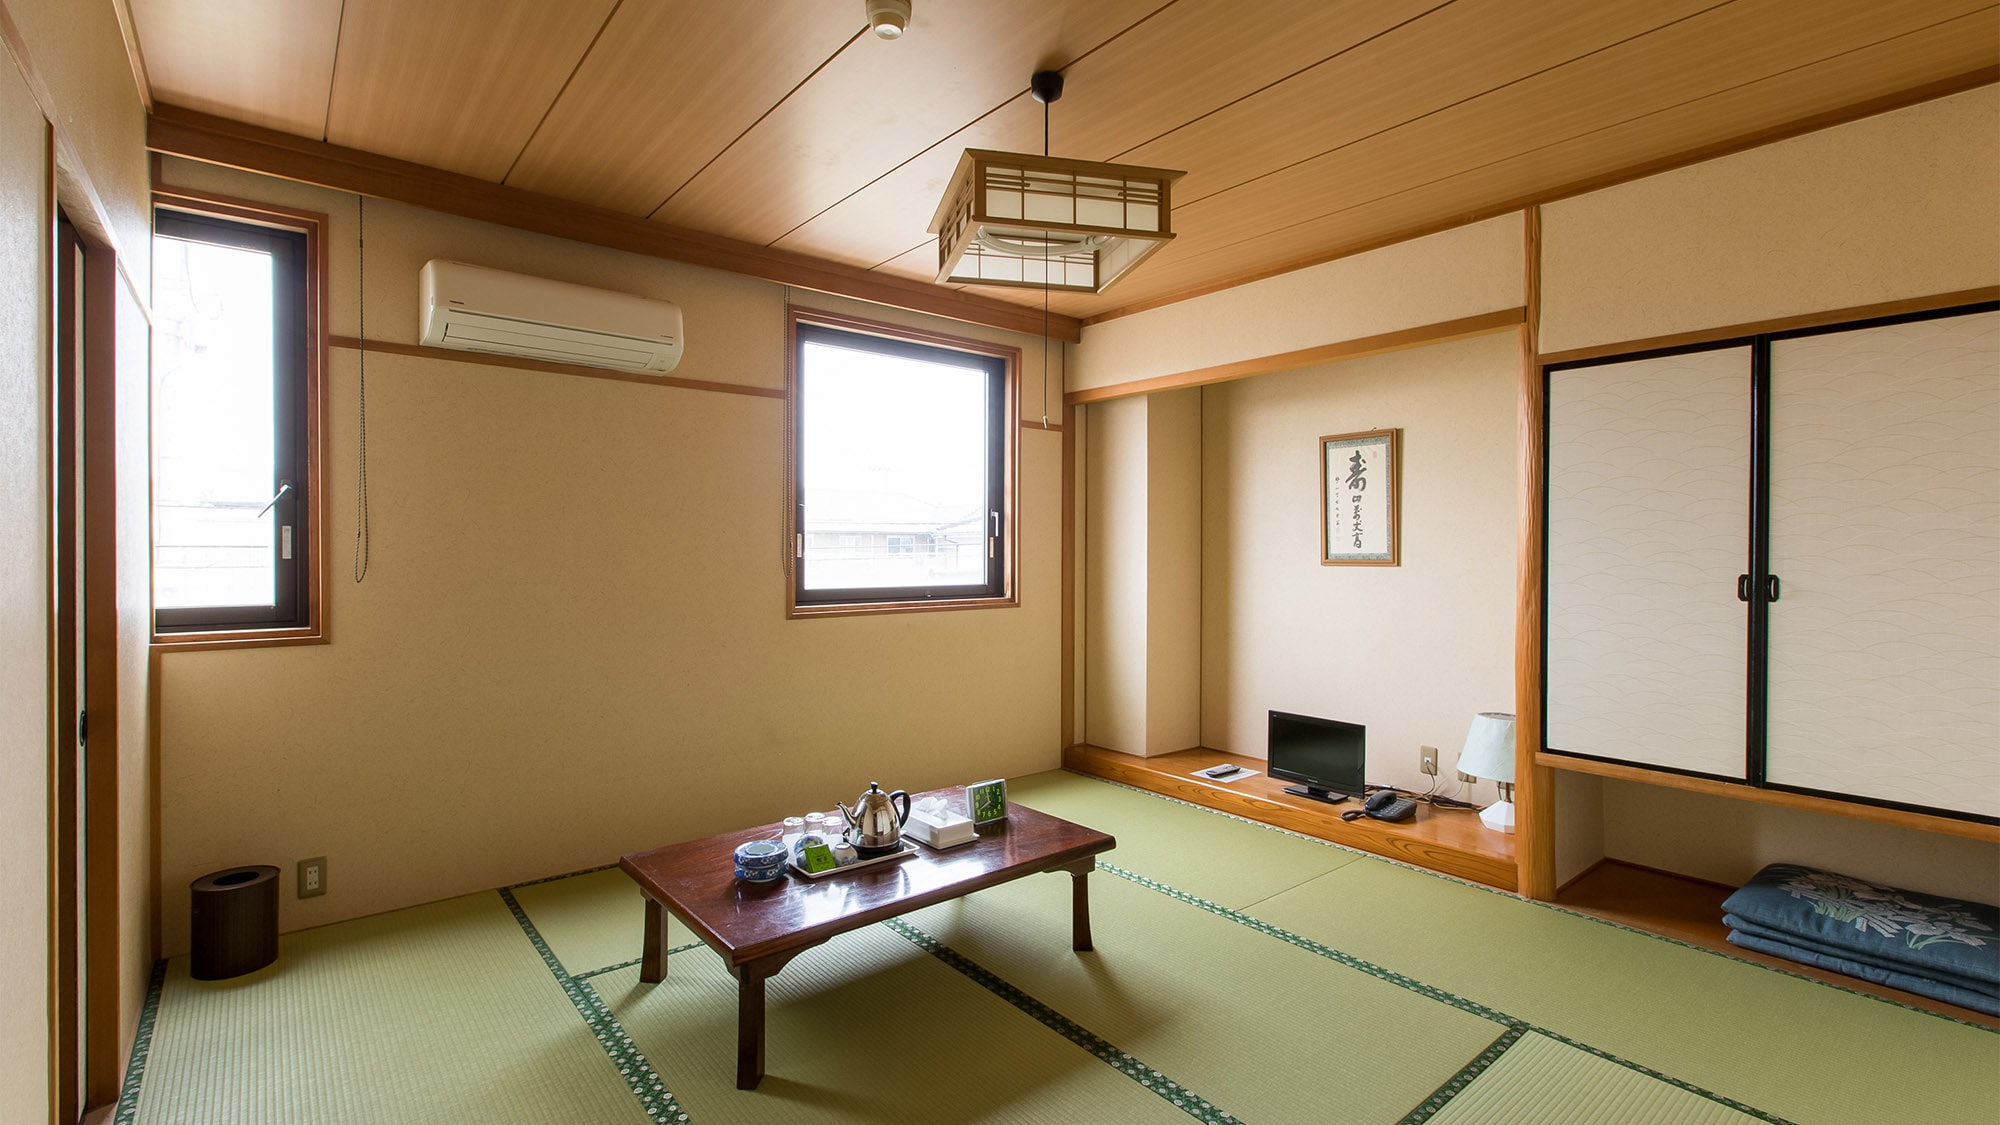 ・ Japanese-style room 8 tatami mats / Futon room is safe even with children